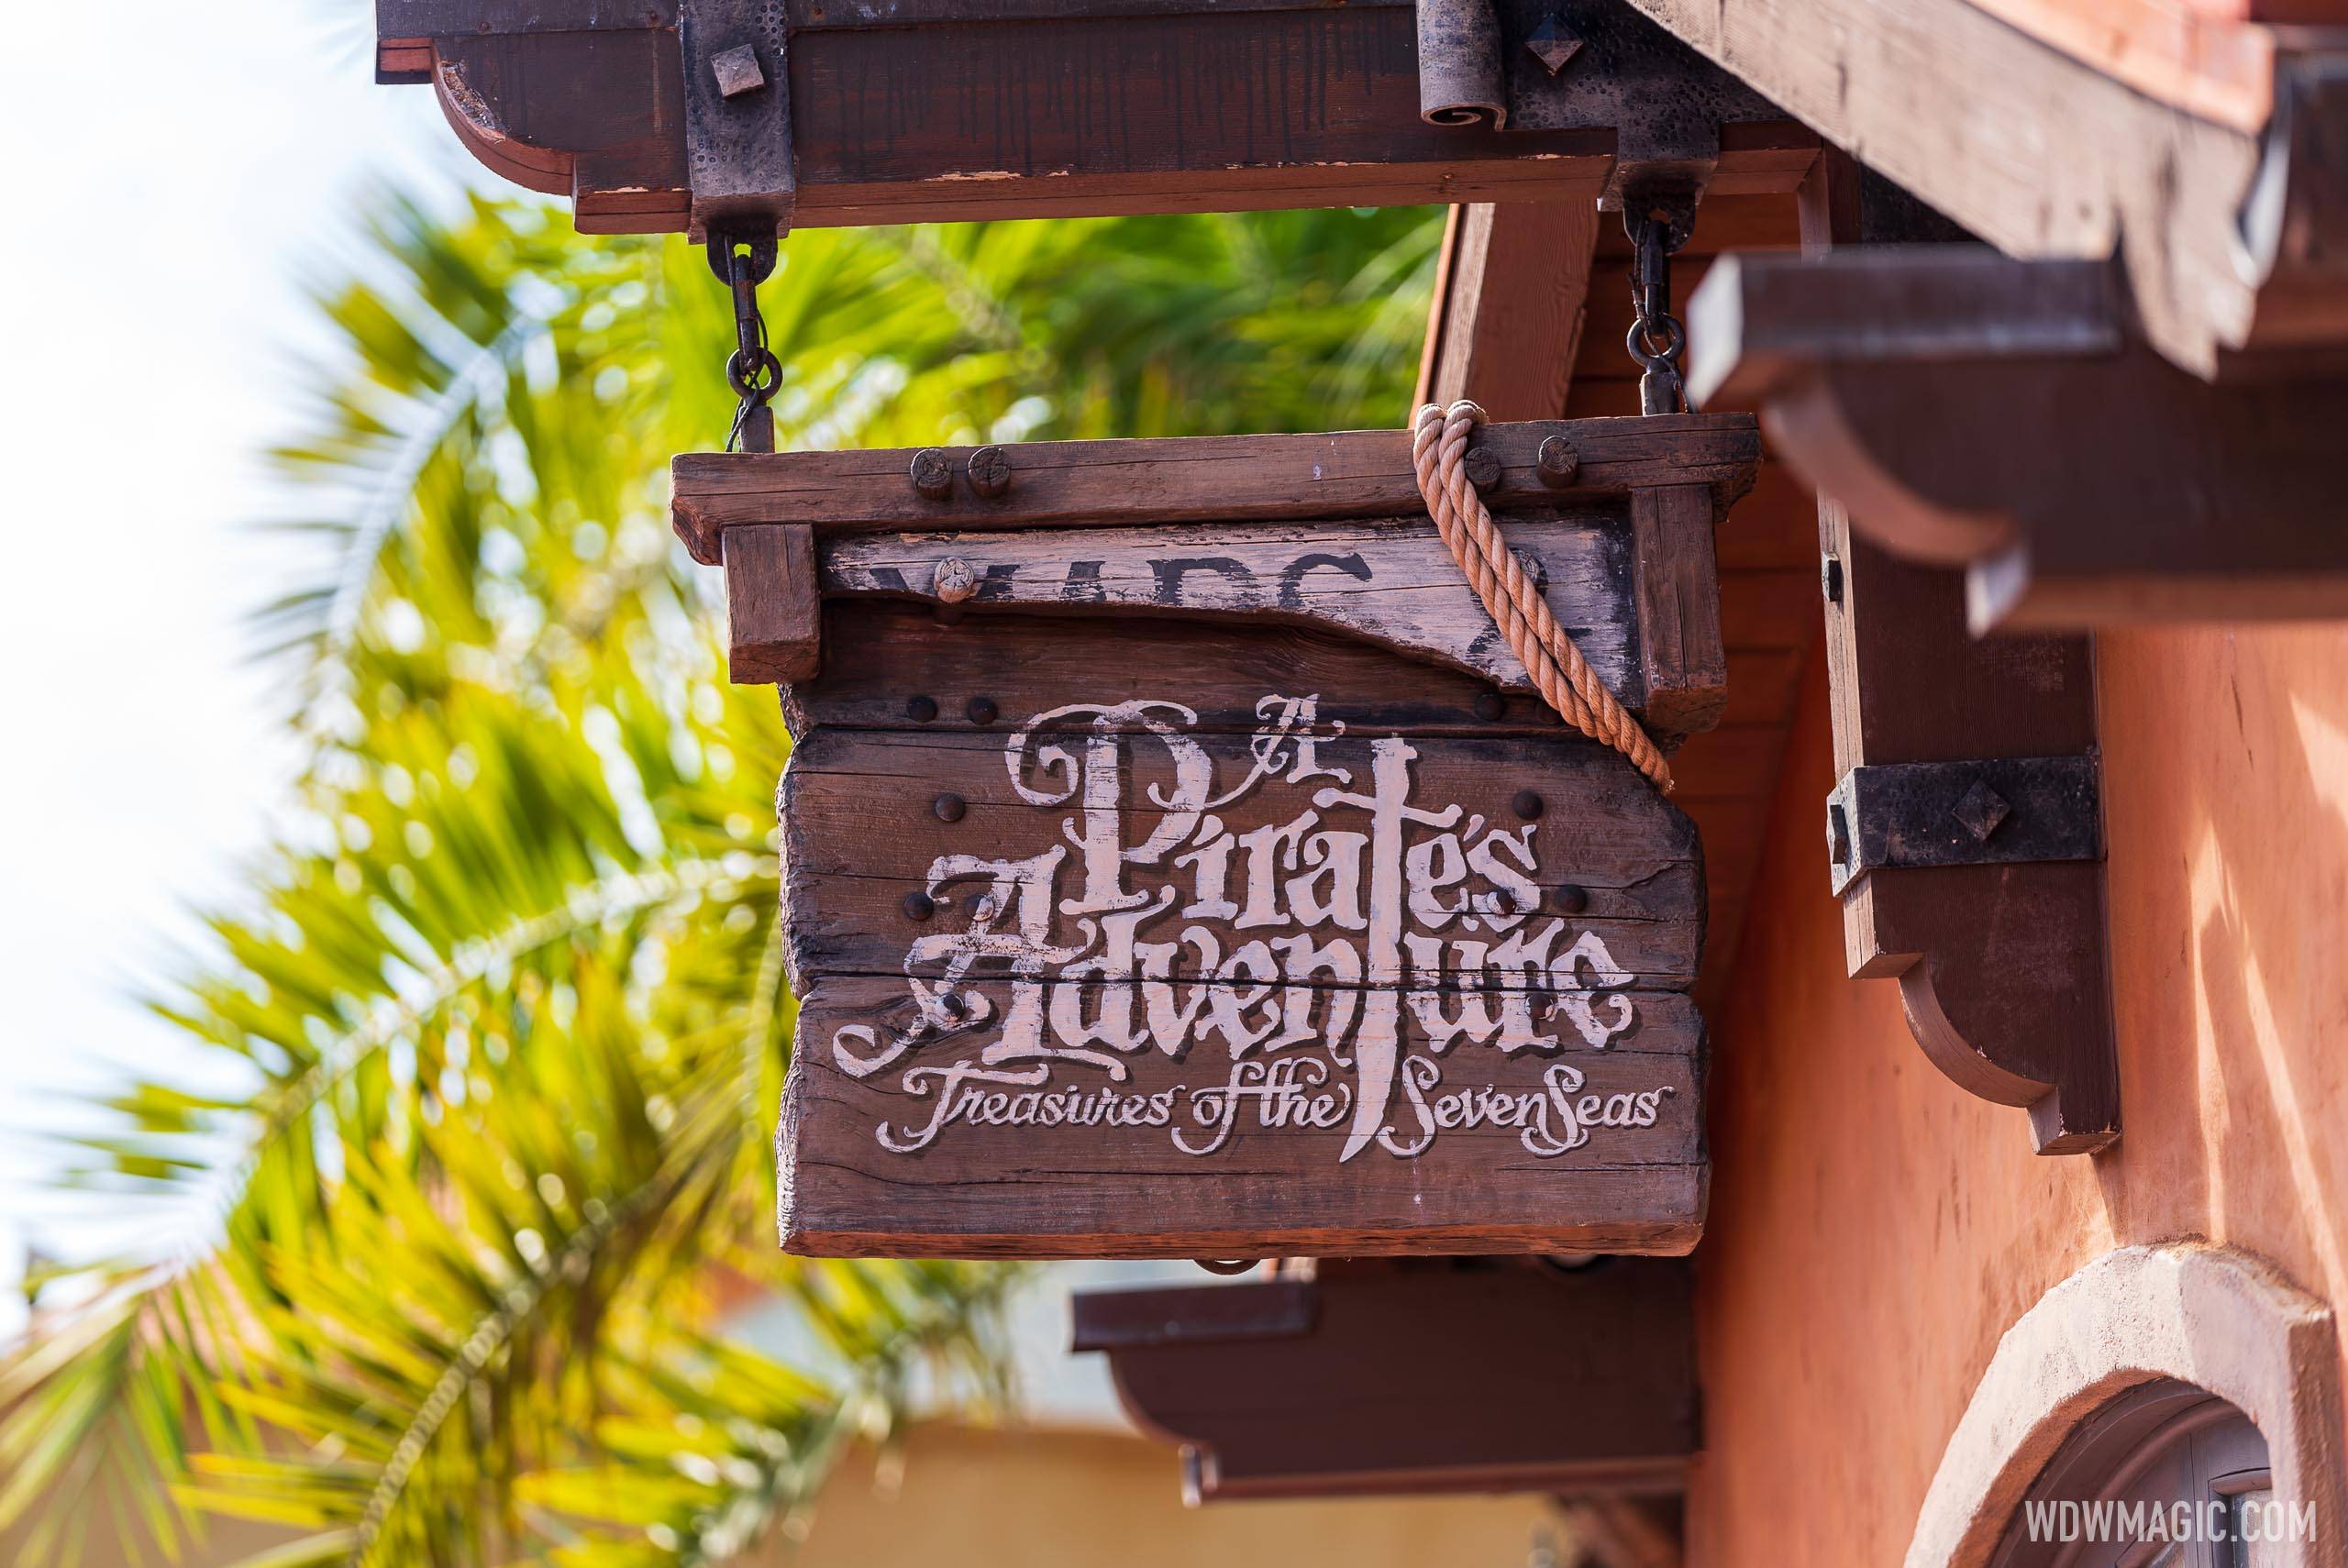 'A Pirate's Adventure Treasures of the Seven Seas' has reopened to guests at Magic Kingdom